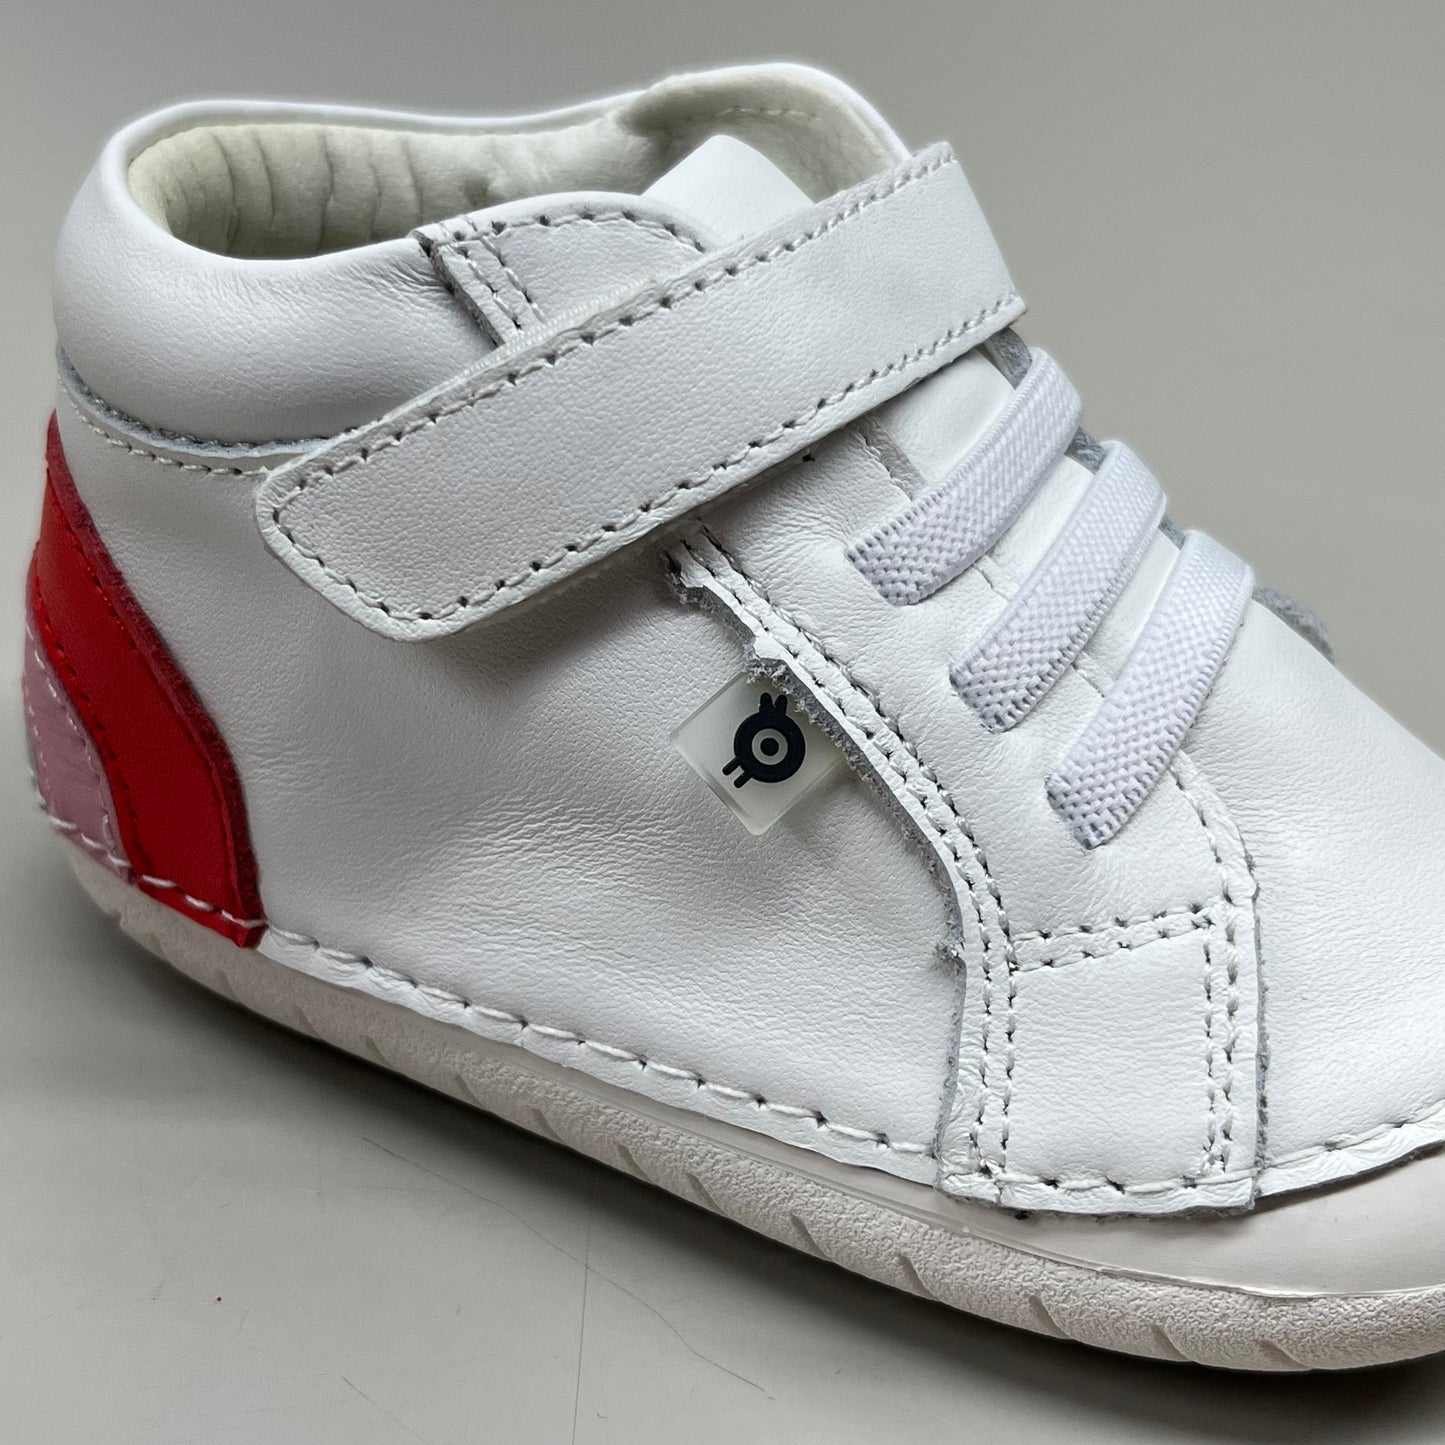 OLD SOLES Baby Champster Leather Shoe Sz 25 US 9 Snow/Red/ Pink/Silver #4091